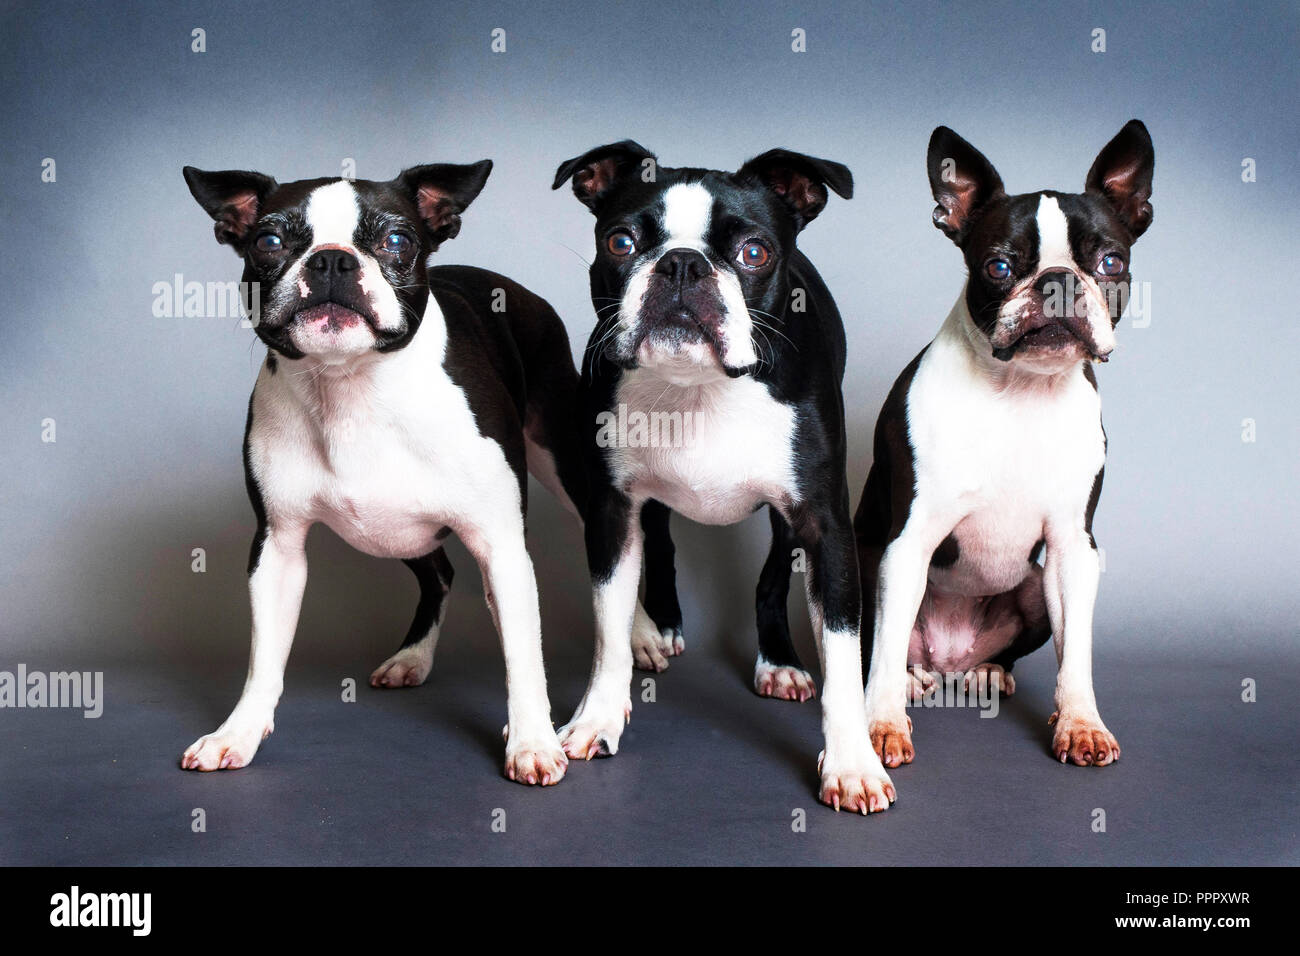 are french bulldogs small or medium